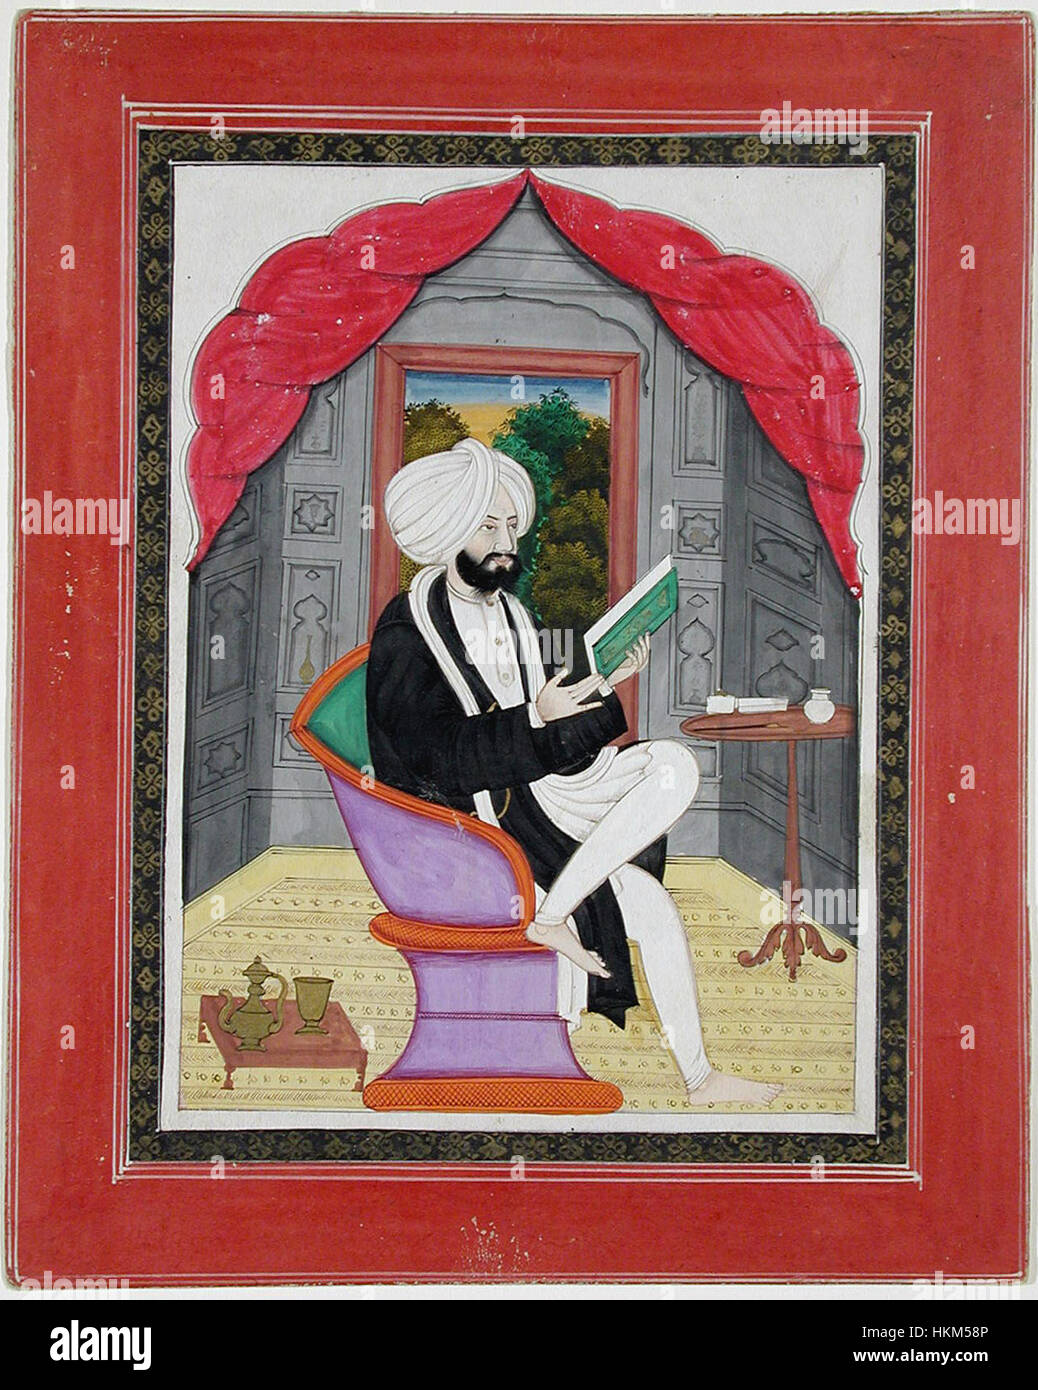 A Sikh Sardar reading from a book, seated in front of a window (6124597647) Stock Photo